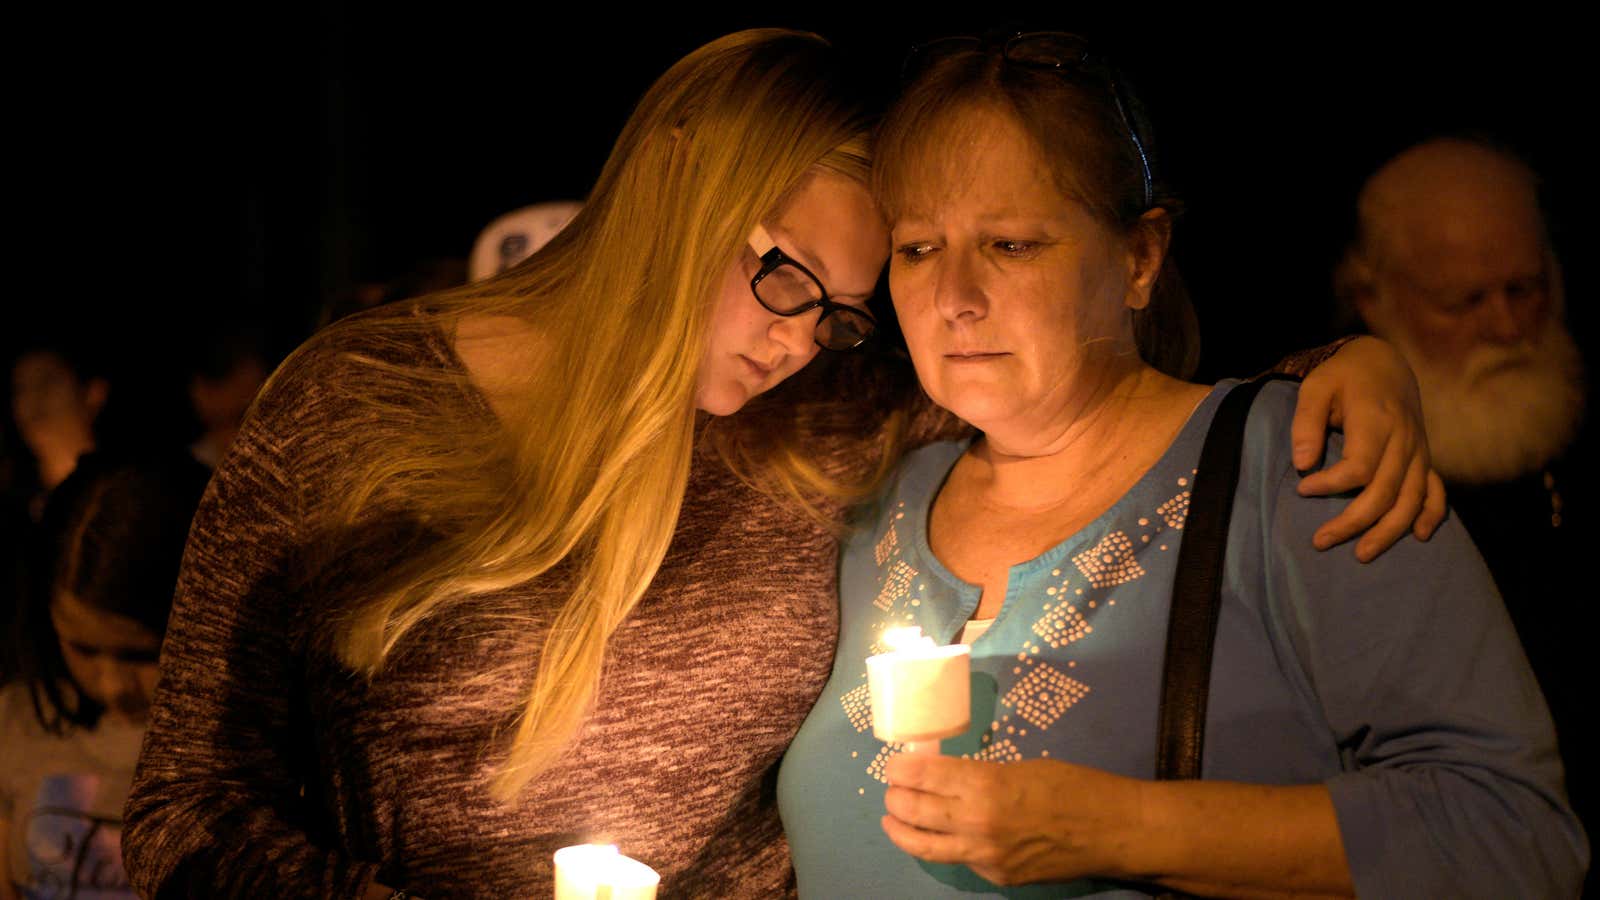 The 26 people killed in the church shooting ranged in age from 18-months to 77-years old.